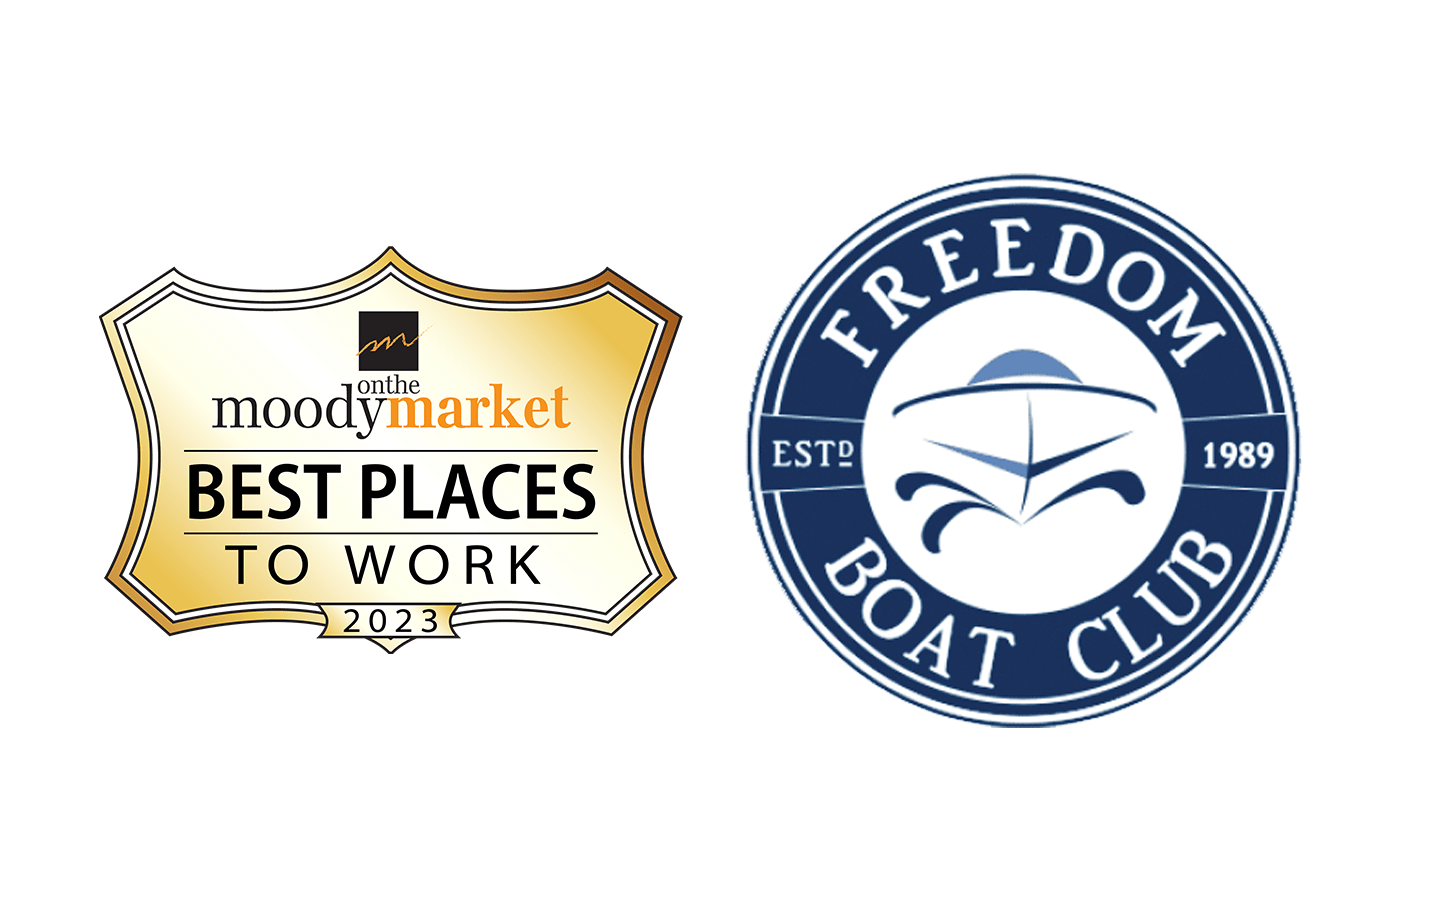 Freedom Boat Club of Michiana Named to 20 Best Places to Work in